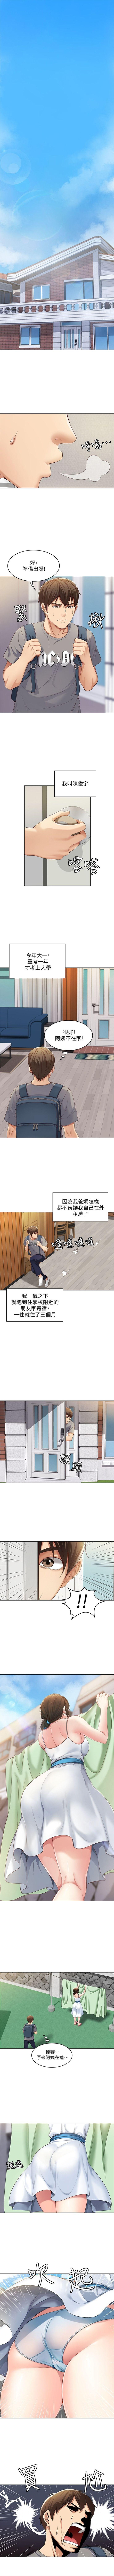 Curious 寄宿日記 1-10 官方中文（連載中） Tiny Tits - Page 2